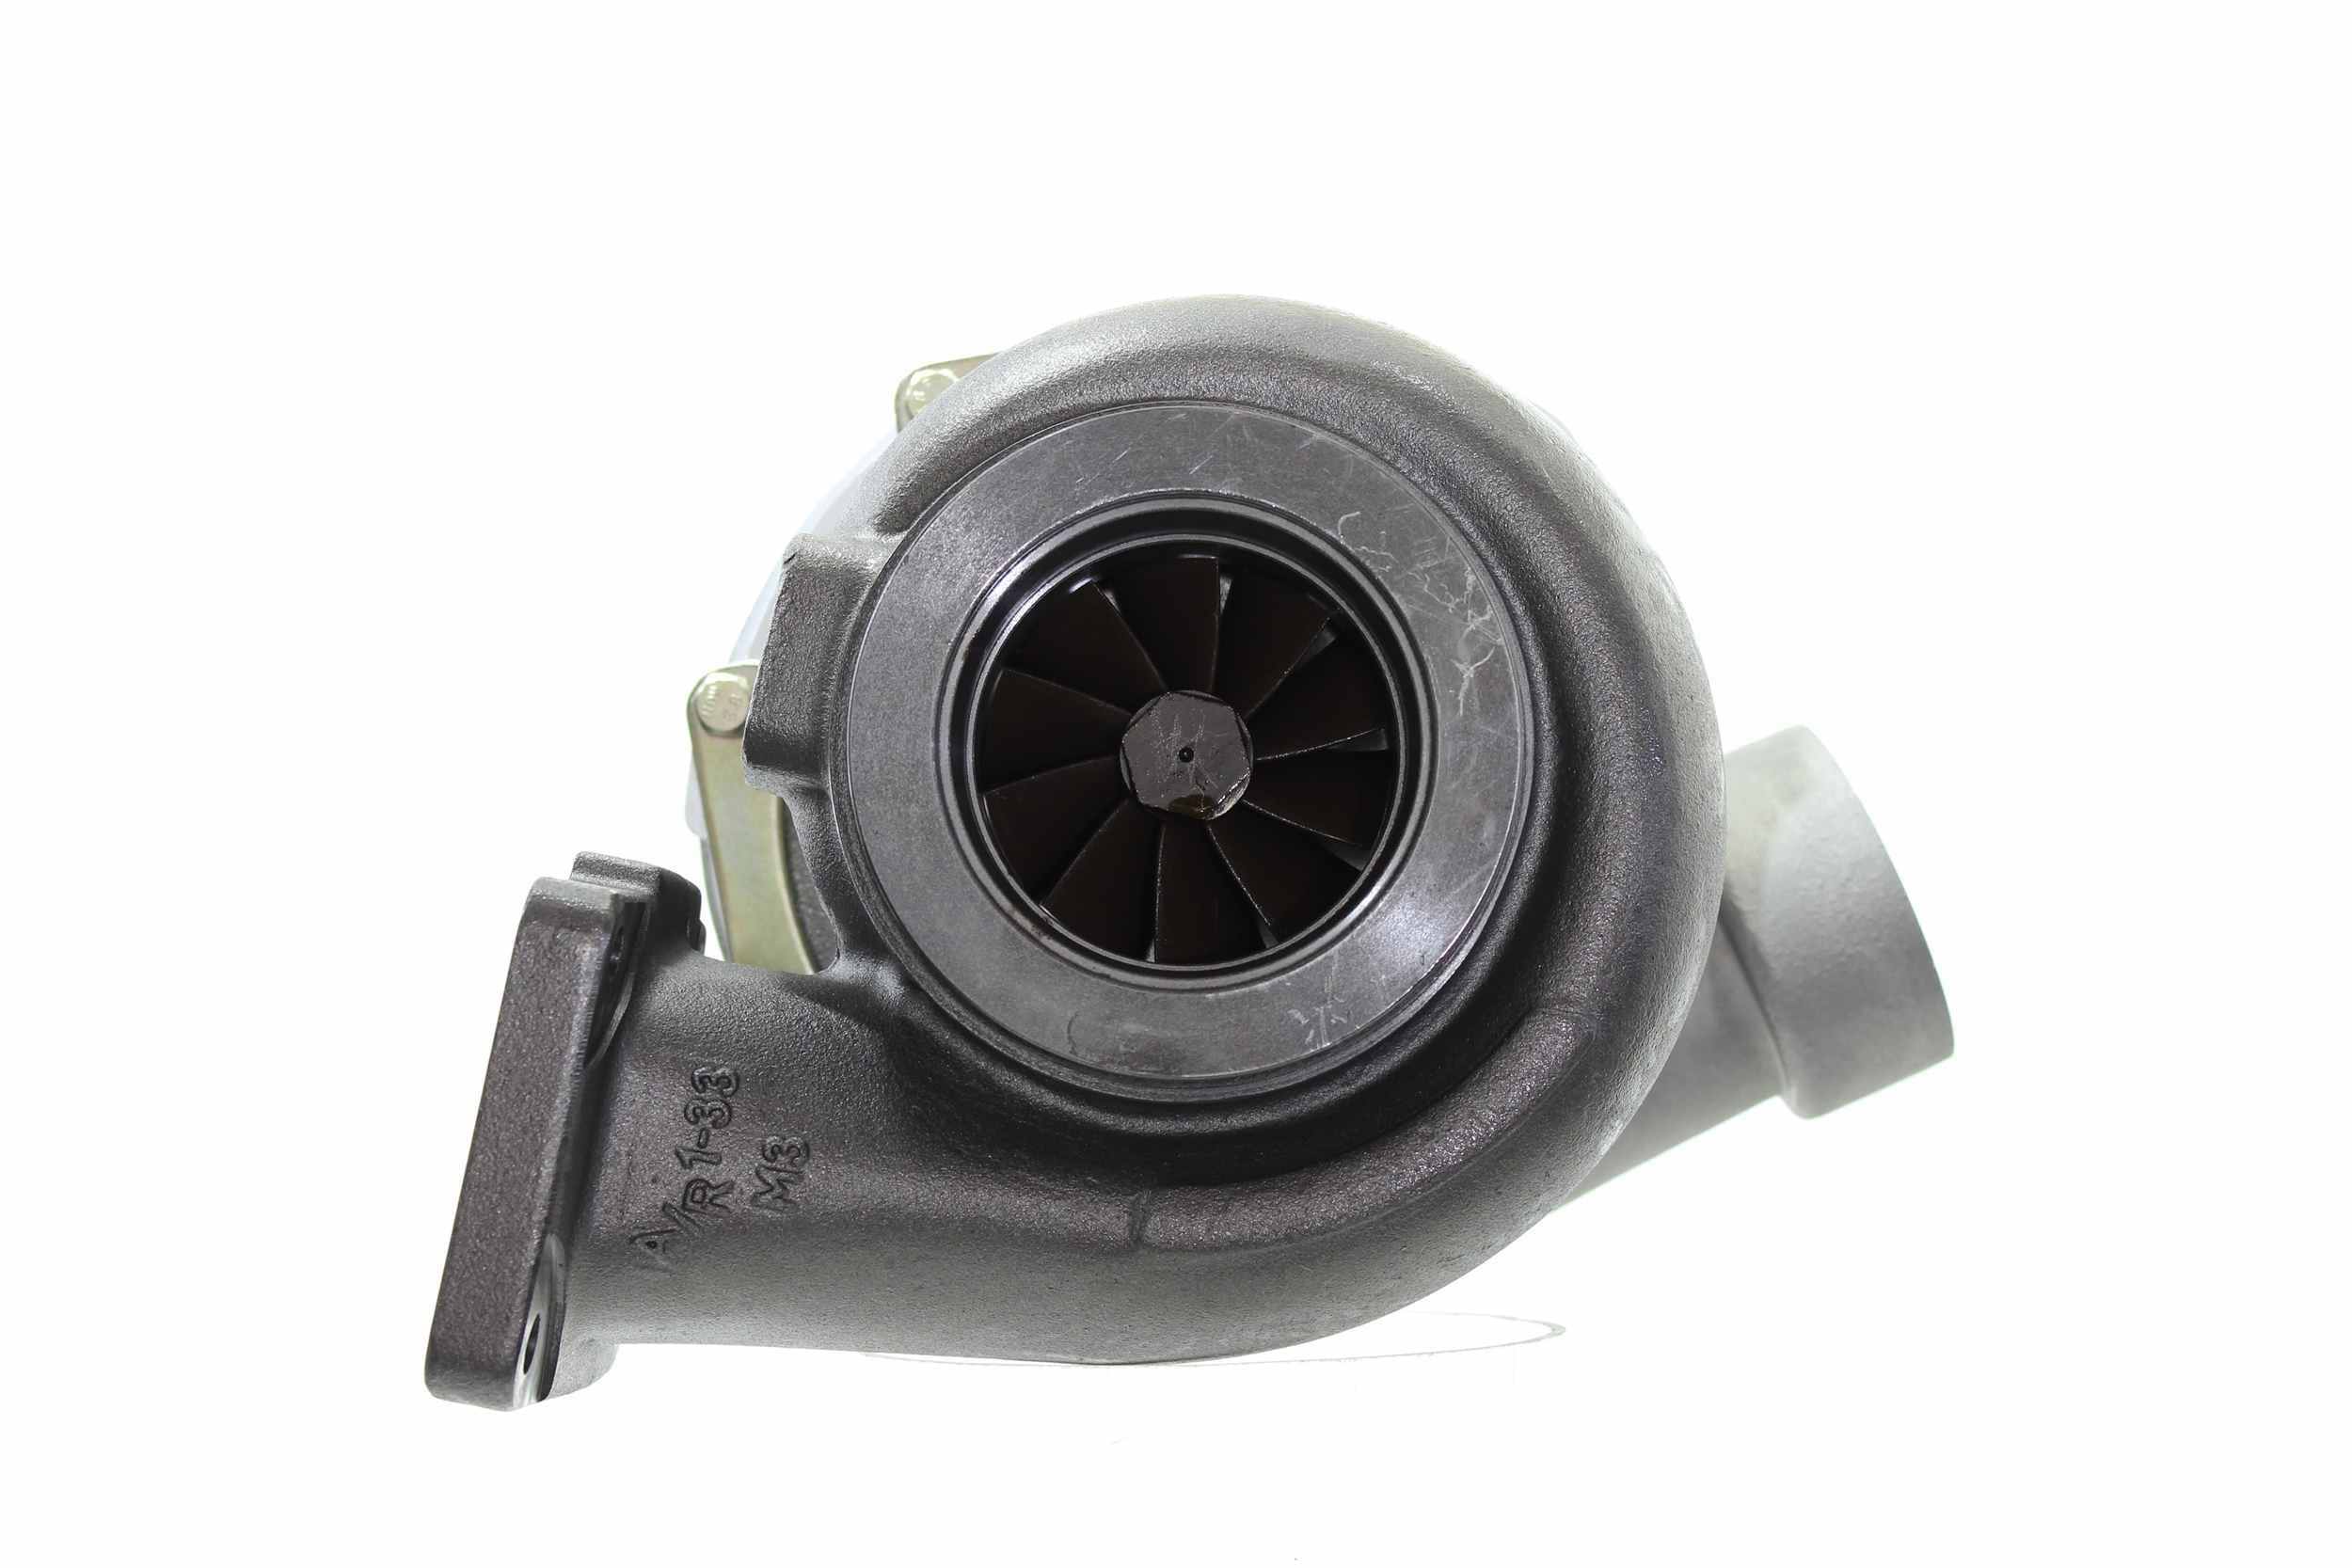 ALANKO 900374 Turbo Exhaust Turbocharger, Incl. Gasket Set, with attachment material